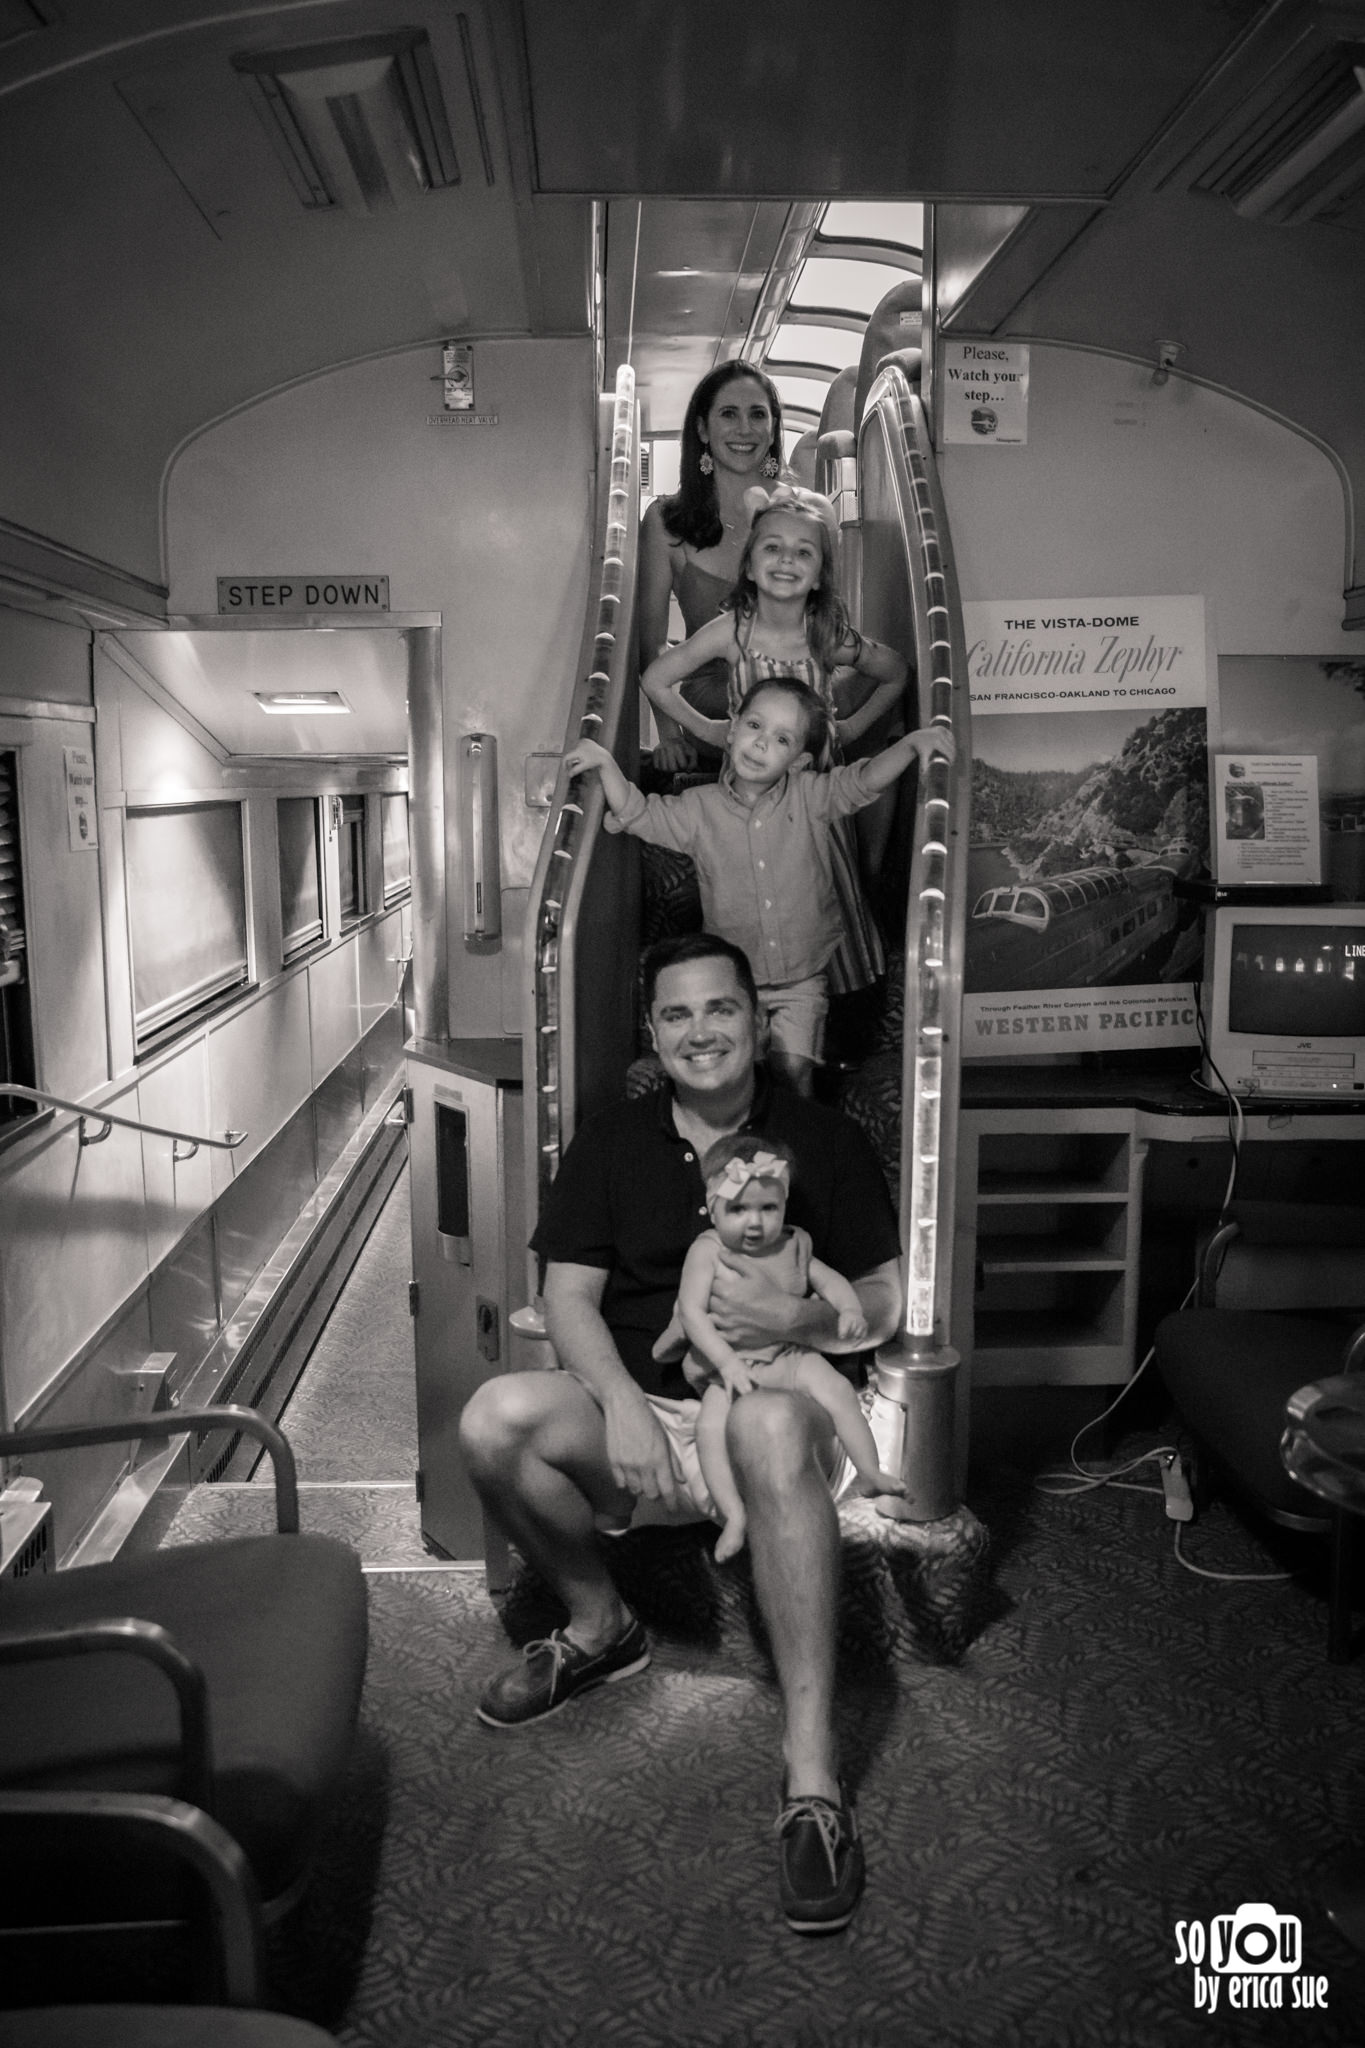 so-you-by-erica-sue-gold-coast-railroad-museum-miami-family-photo-shoot-session-7044.JPG